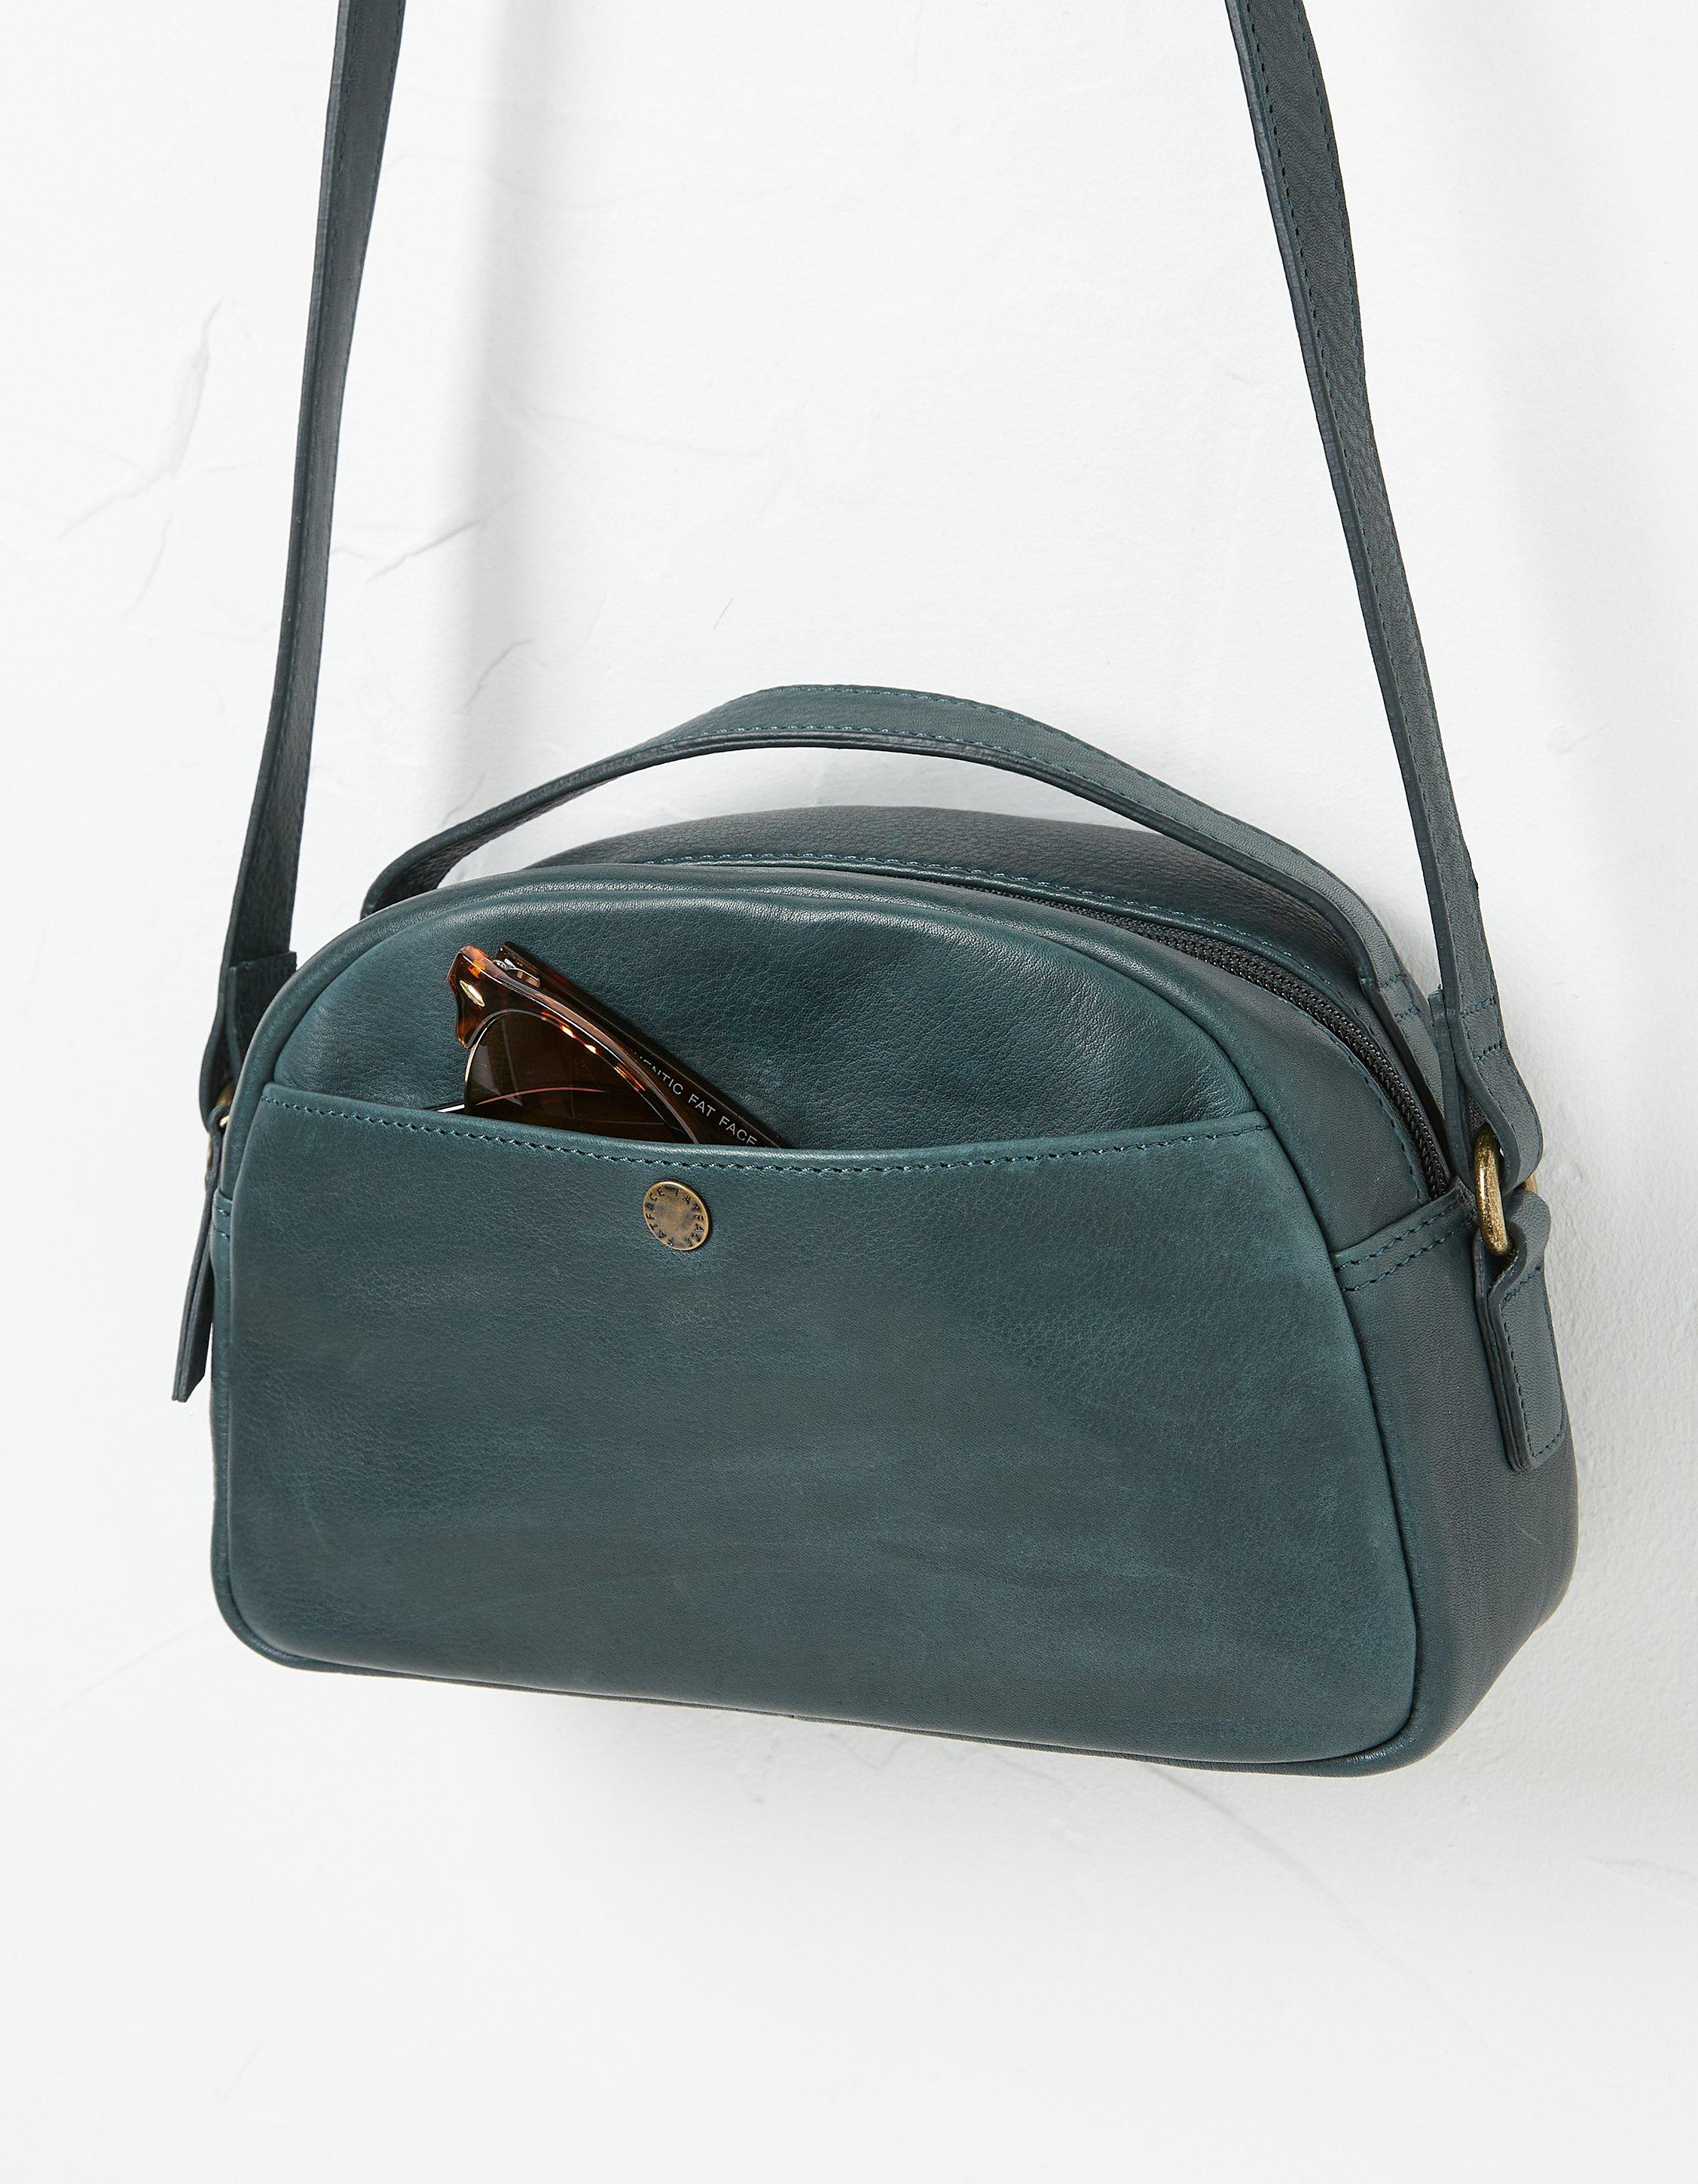  Other Stories Small Crescent Leather Bag in Black